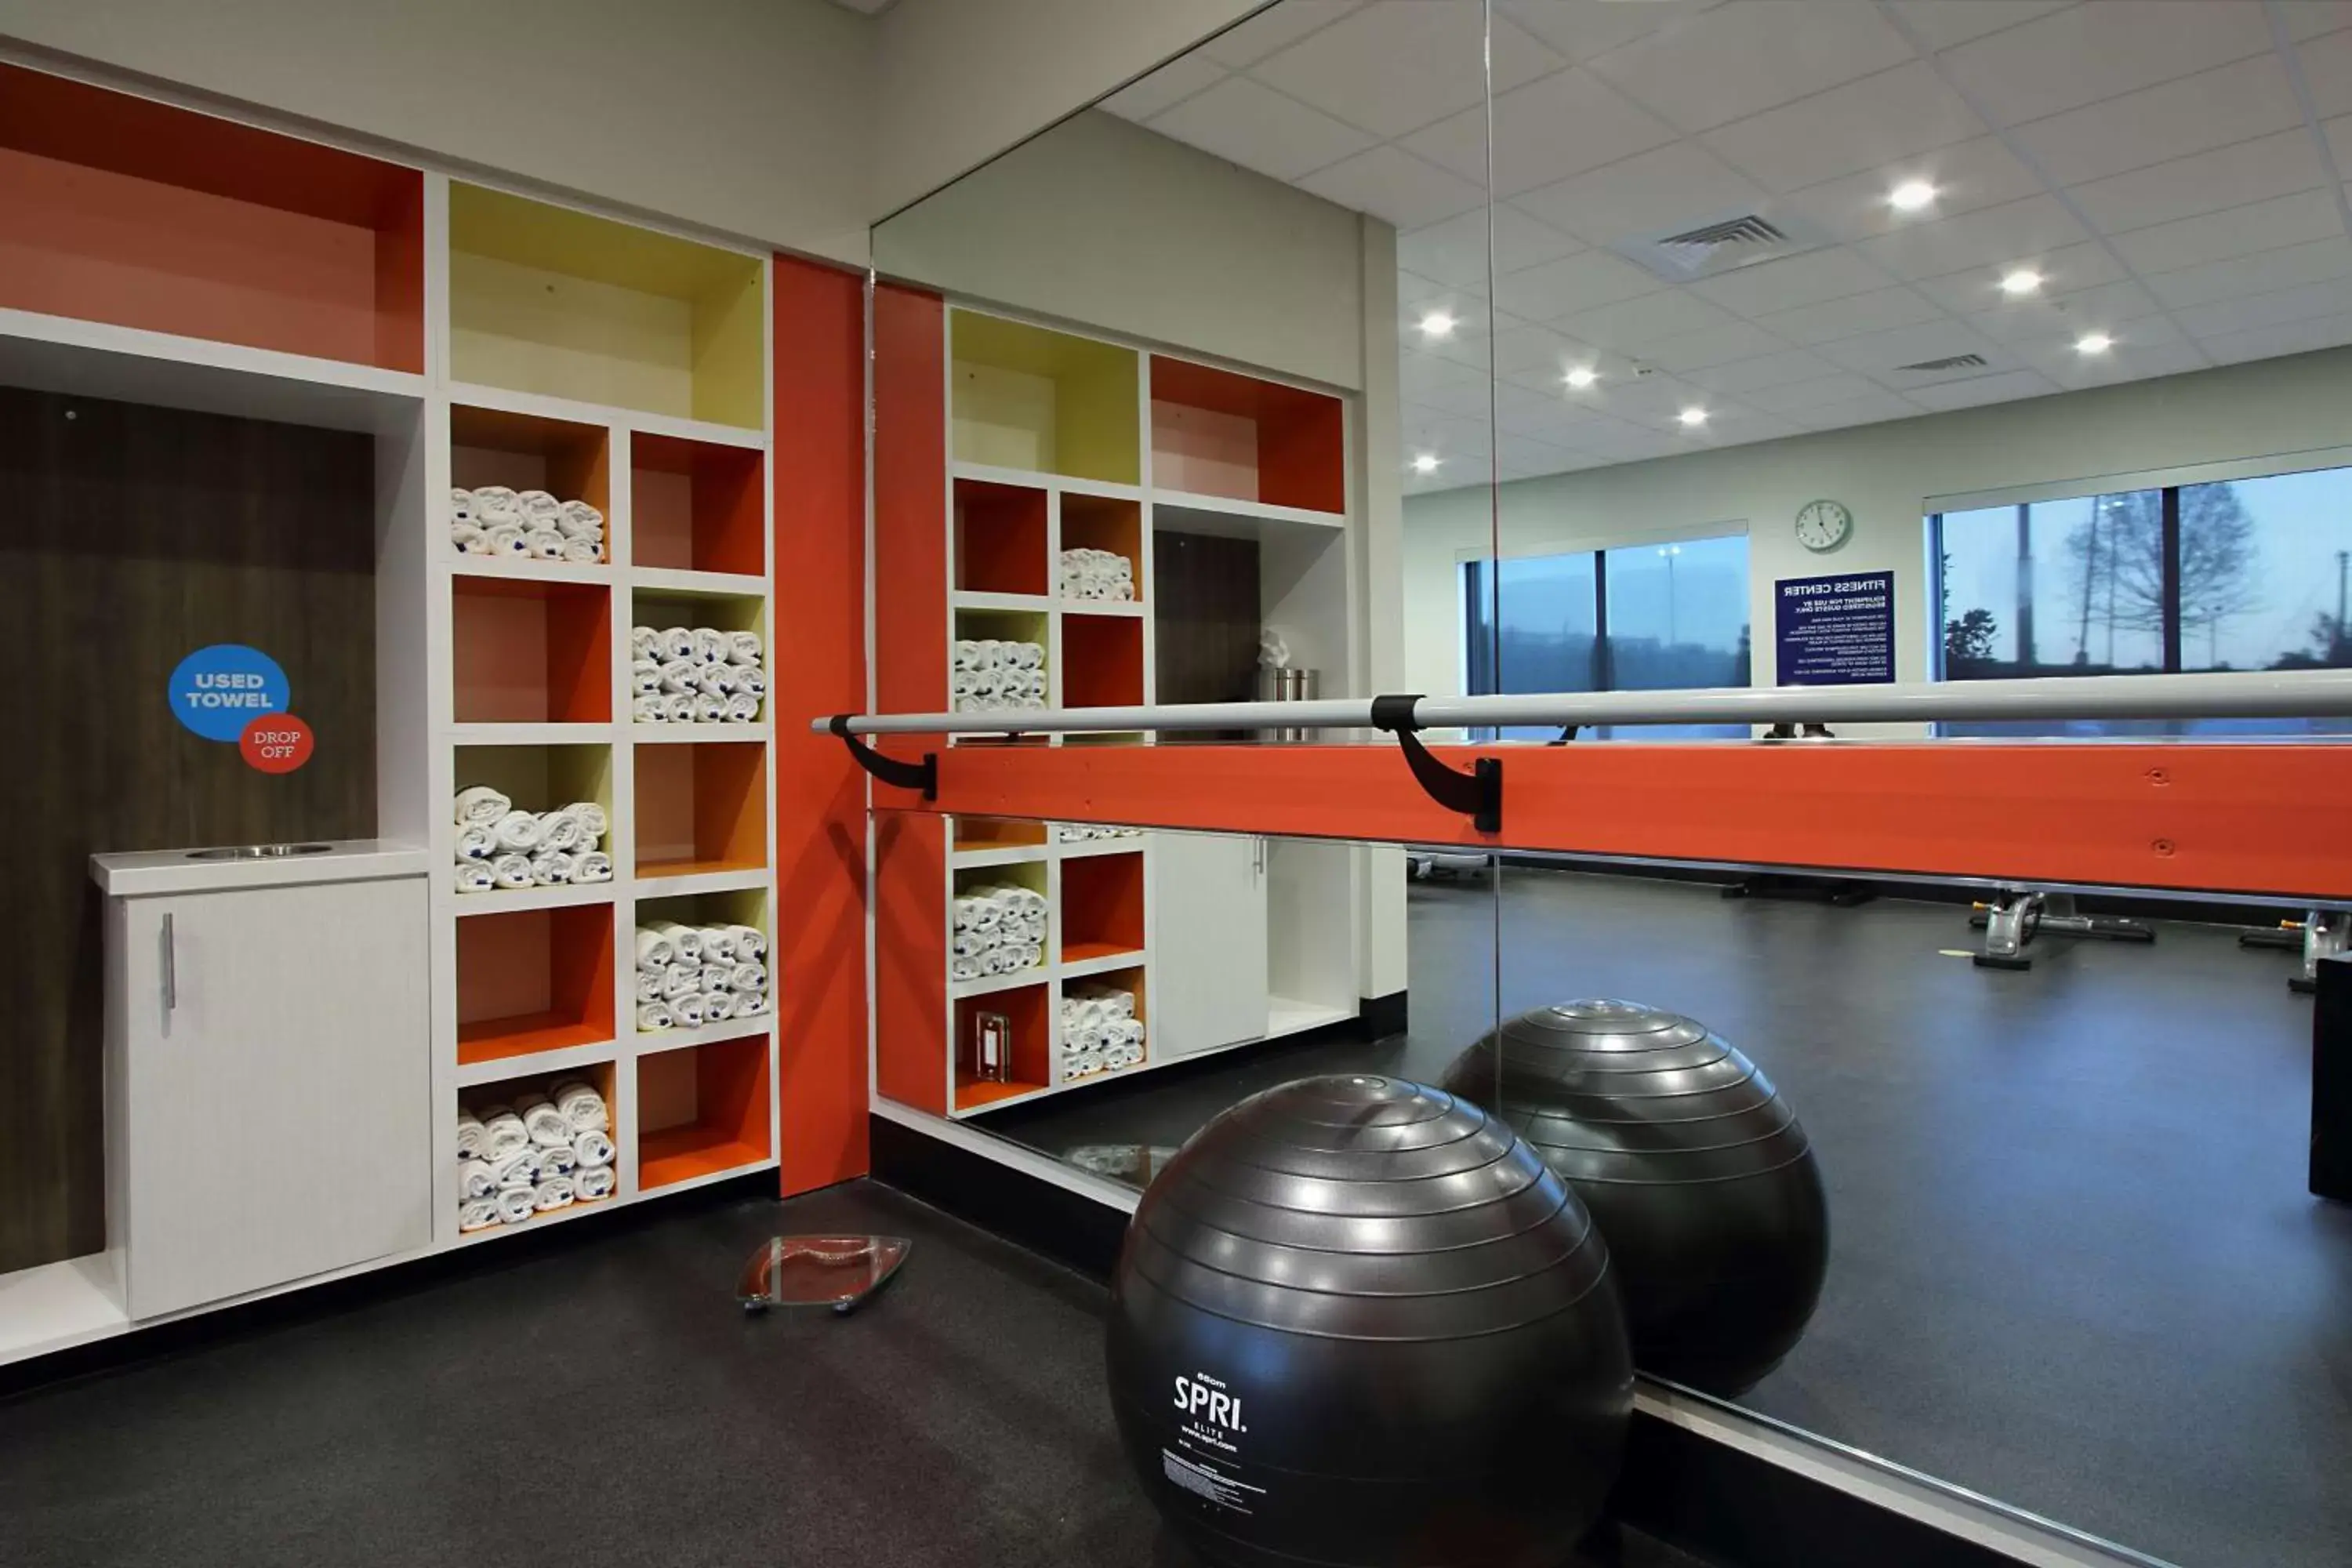 Fitness centre/facilities in Tru By Hilton Meridian